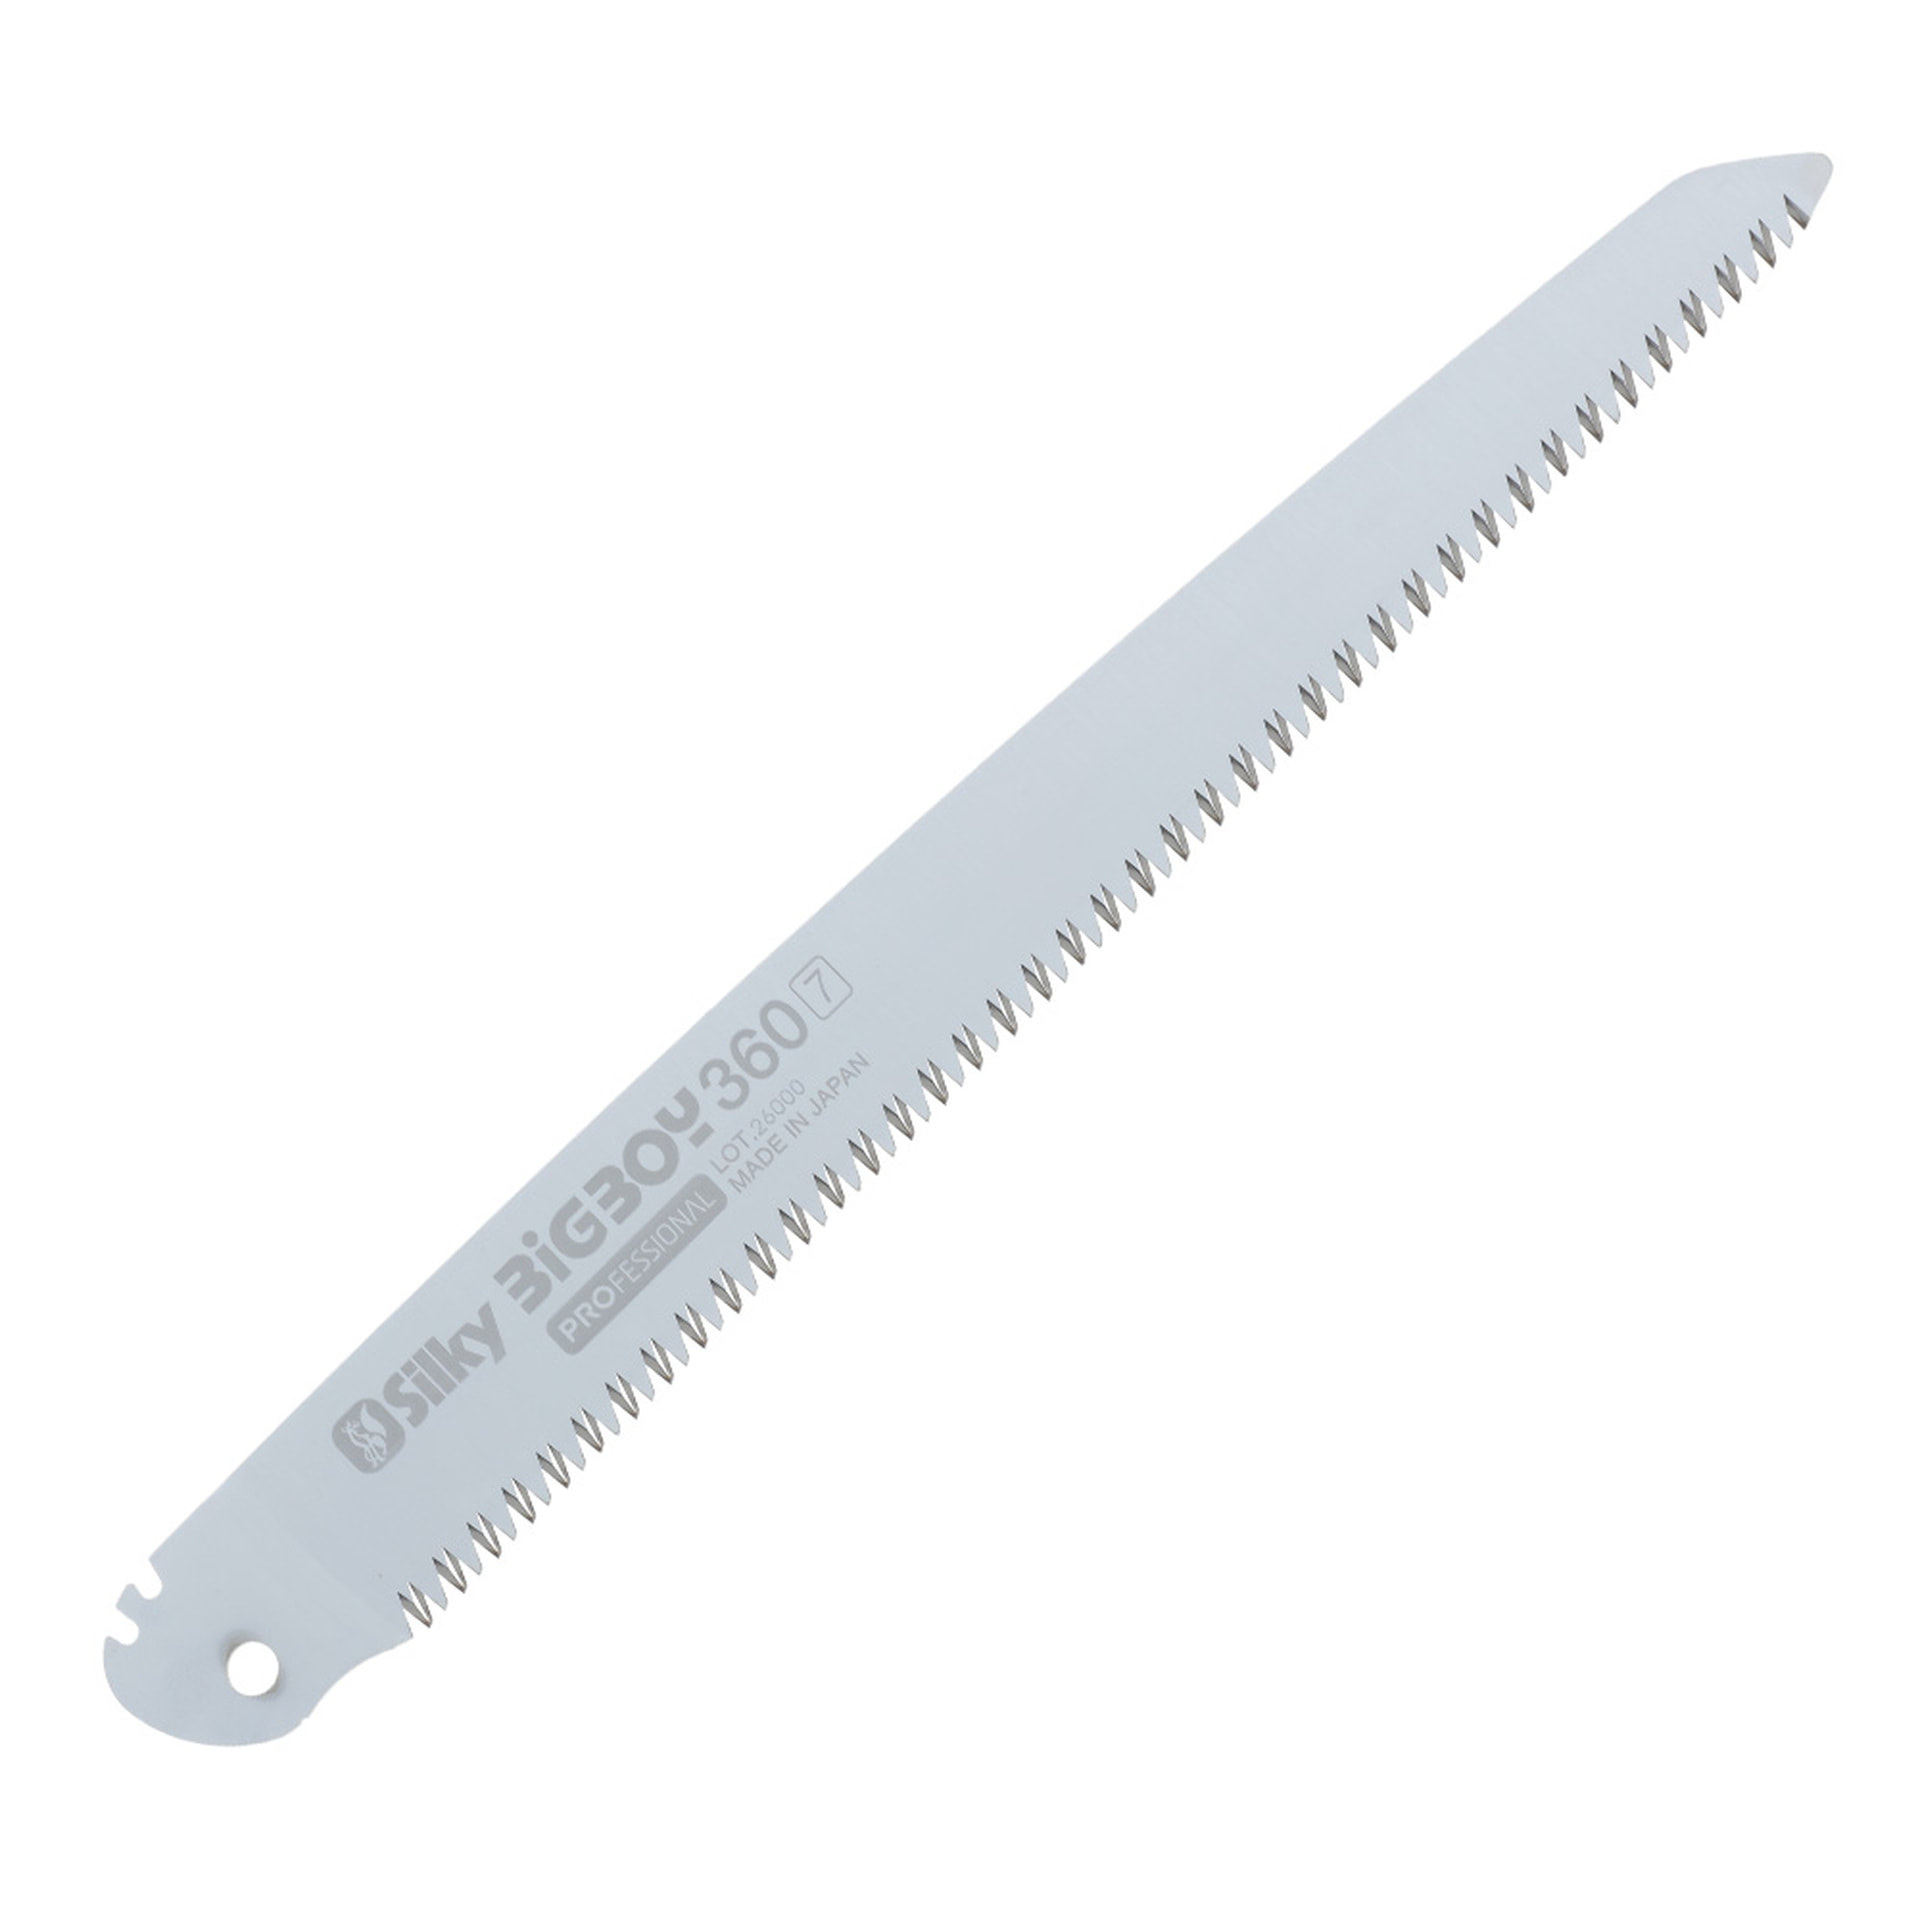 Silky Replacement saw Blade Only SUGOWAZA 420mm XL Teeth 